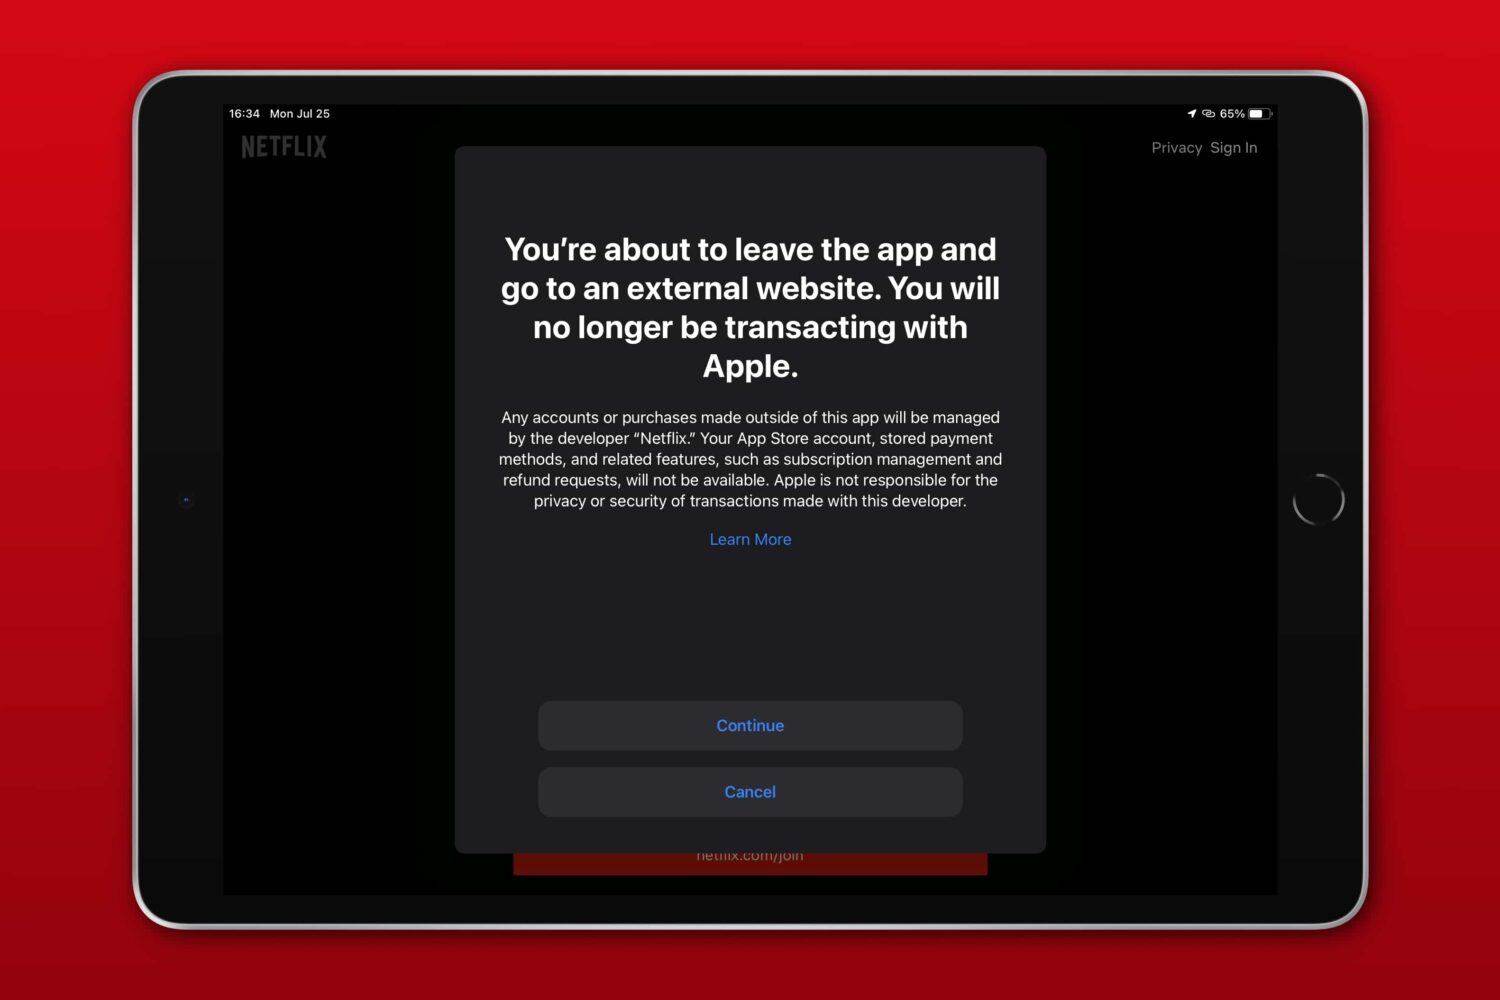 iPad screenshot showing a disclaimer when using external payments in the Netflix app